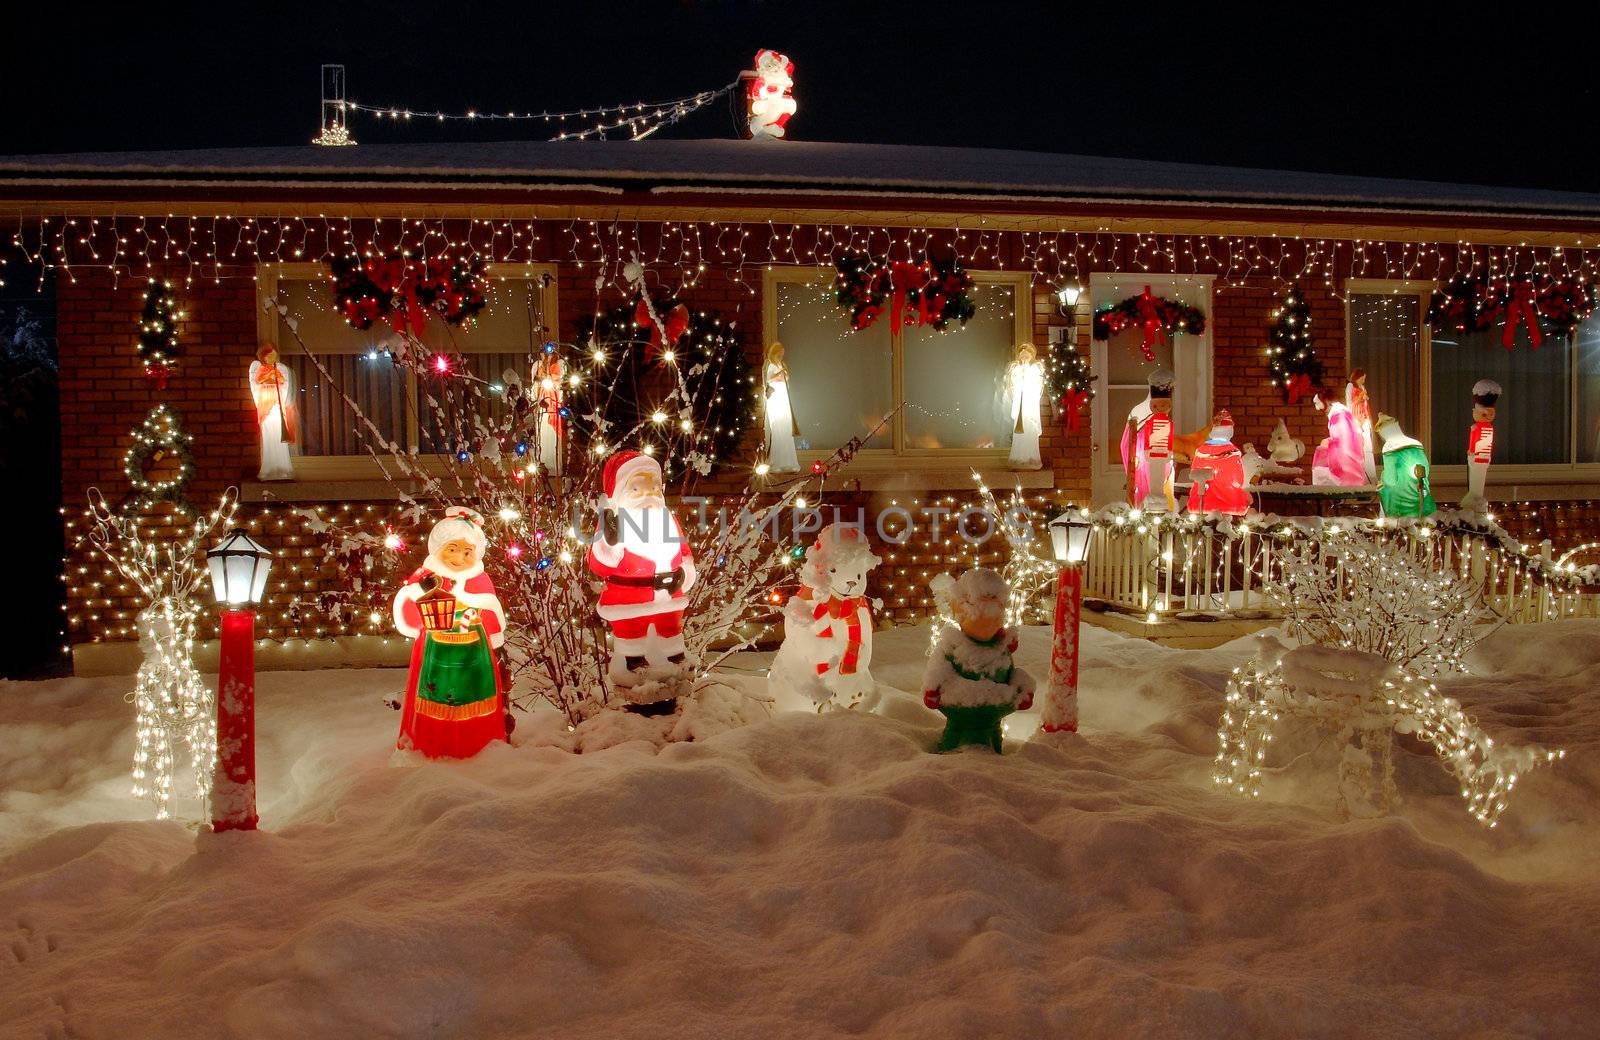 Christmas lights welcoming visitors in front of a house